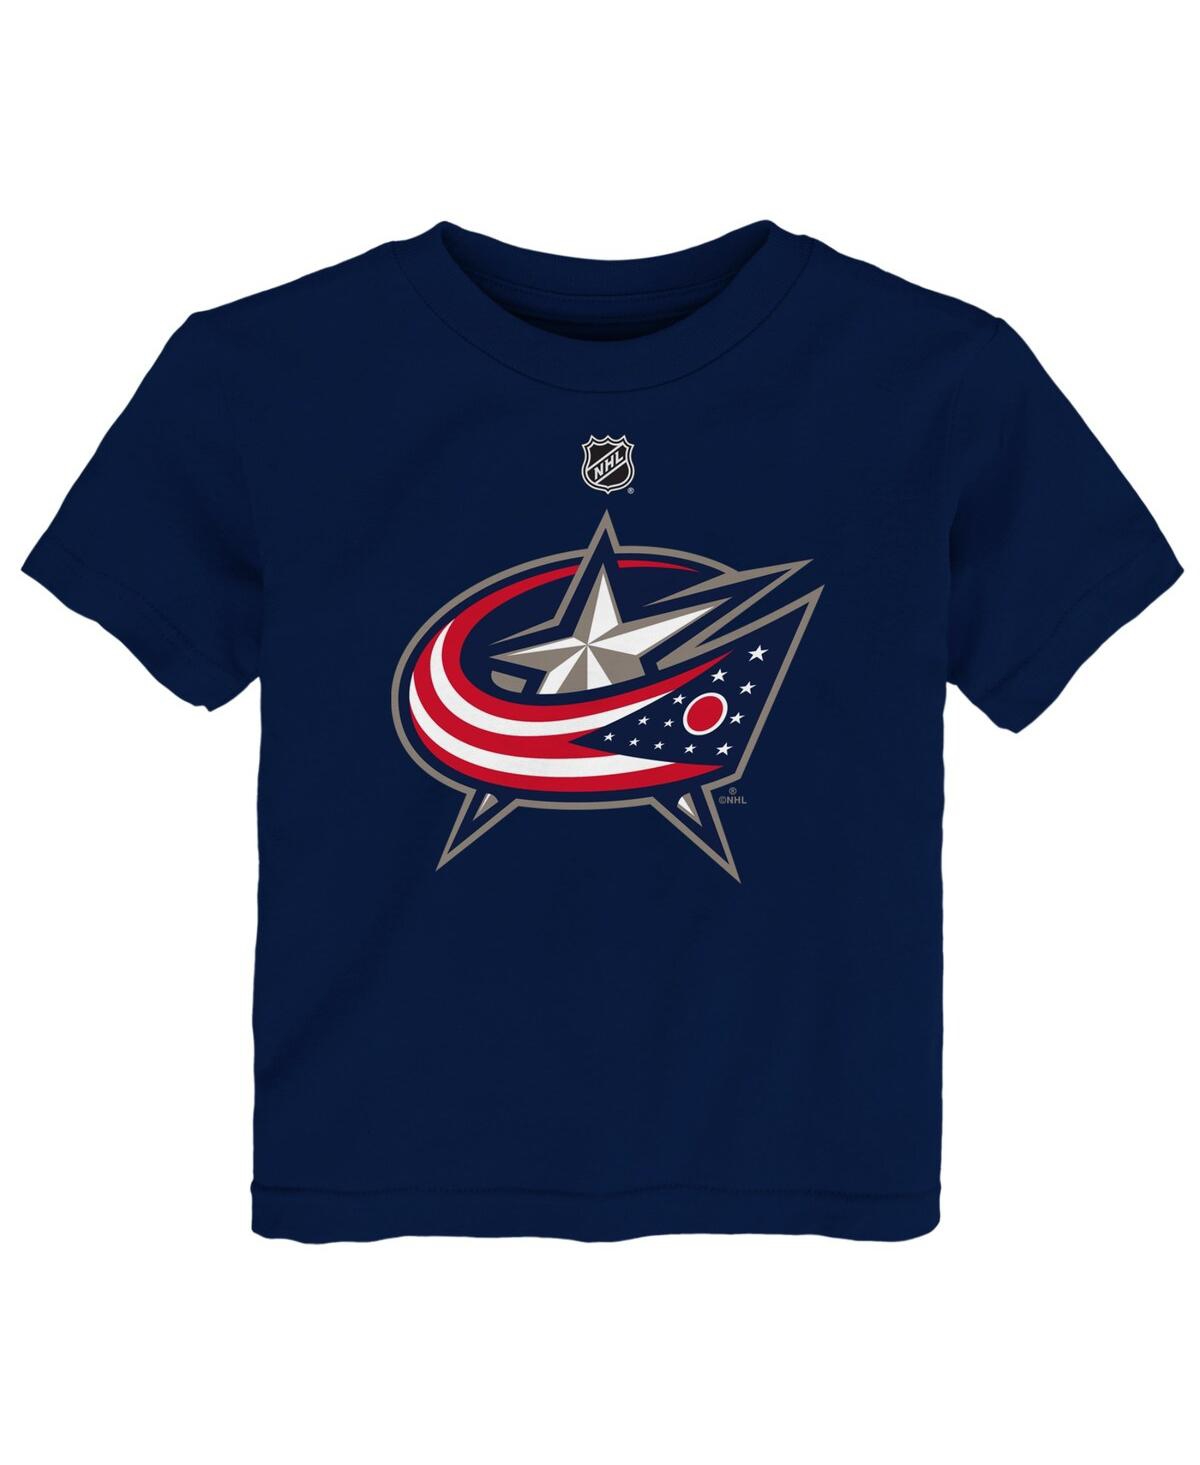 Outerstuff Babies' Toddler Boys Navy Columbus Blue Jackets Primary Logo T-shirt